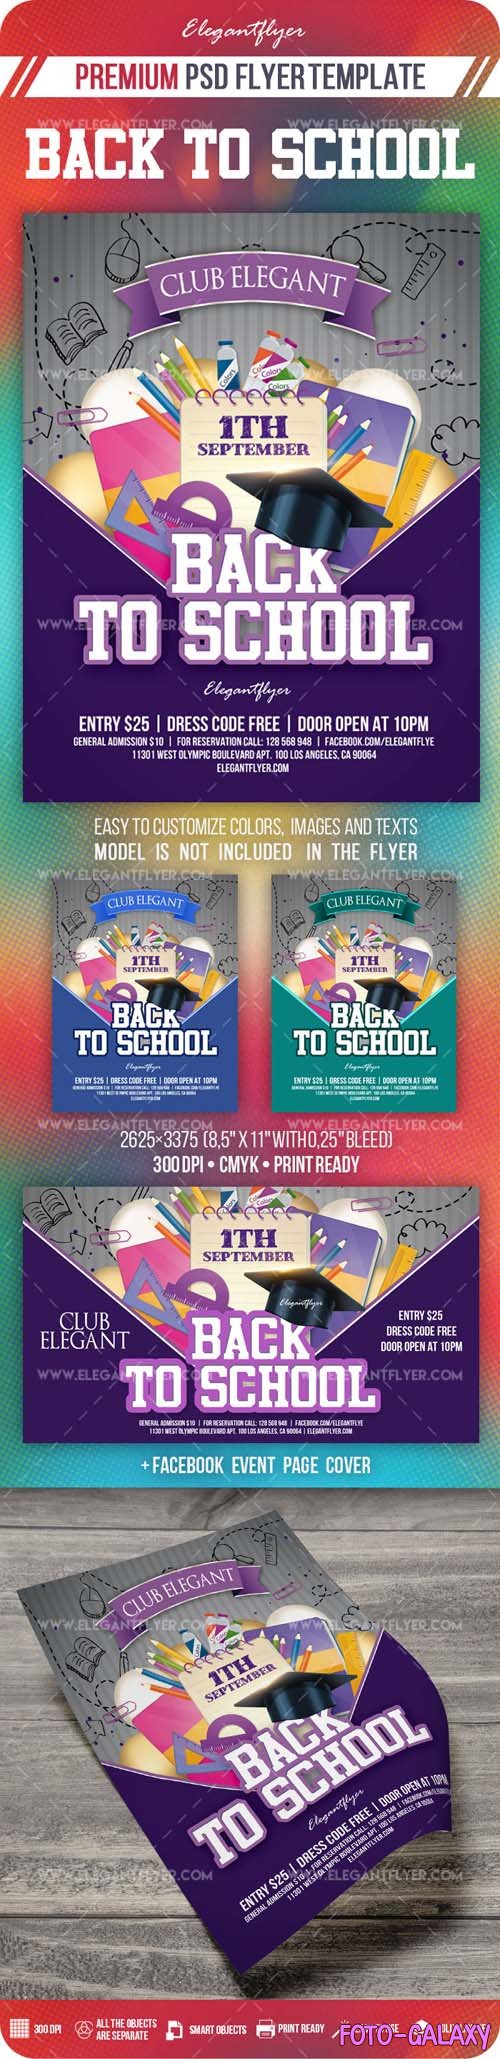 Back to School Flyer PSD Template